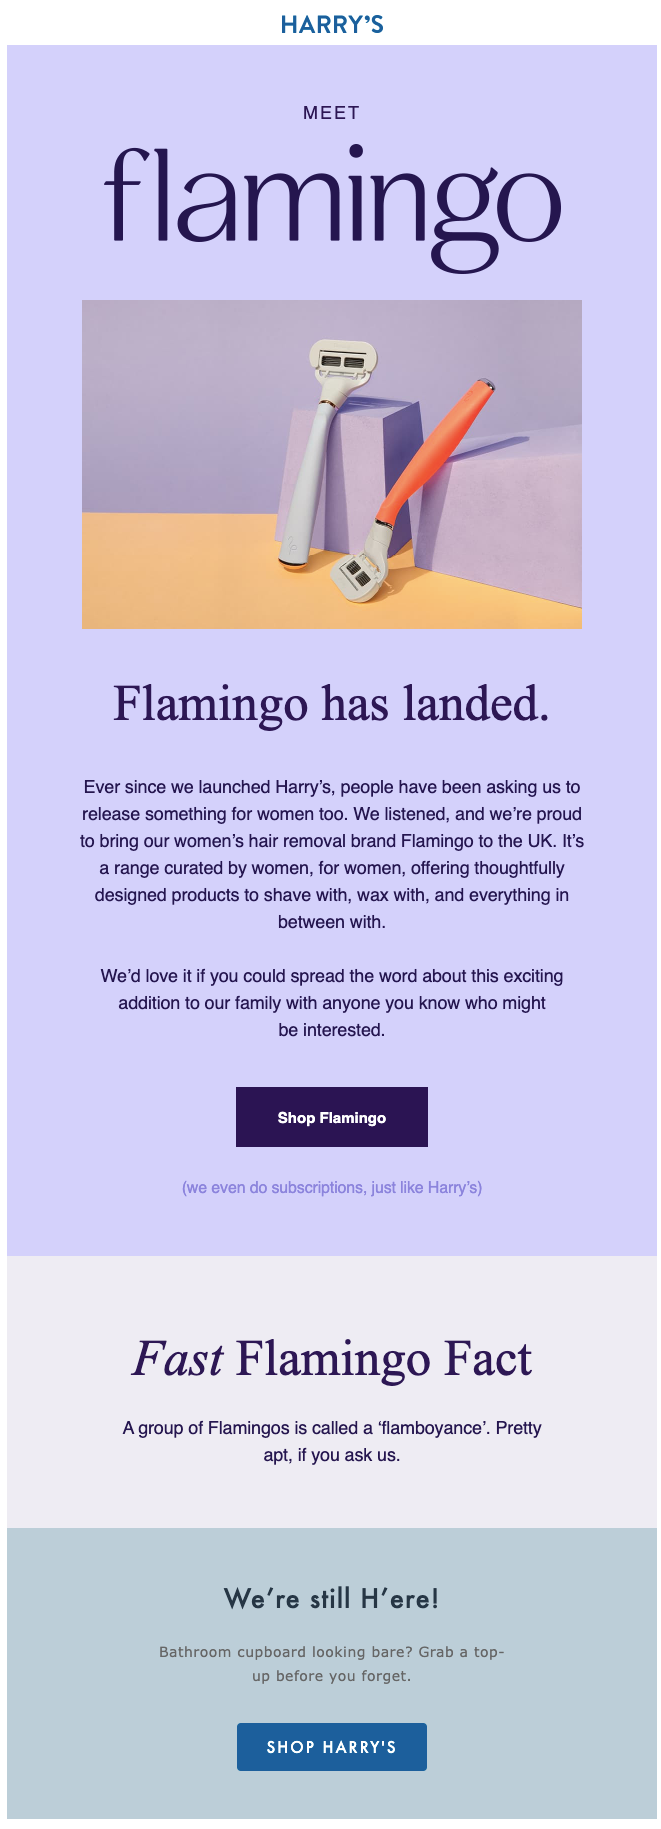 Harry's New Product Launch Email